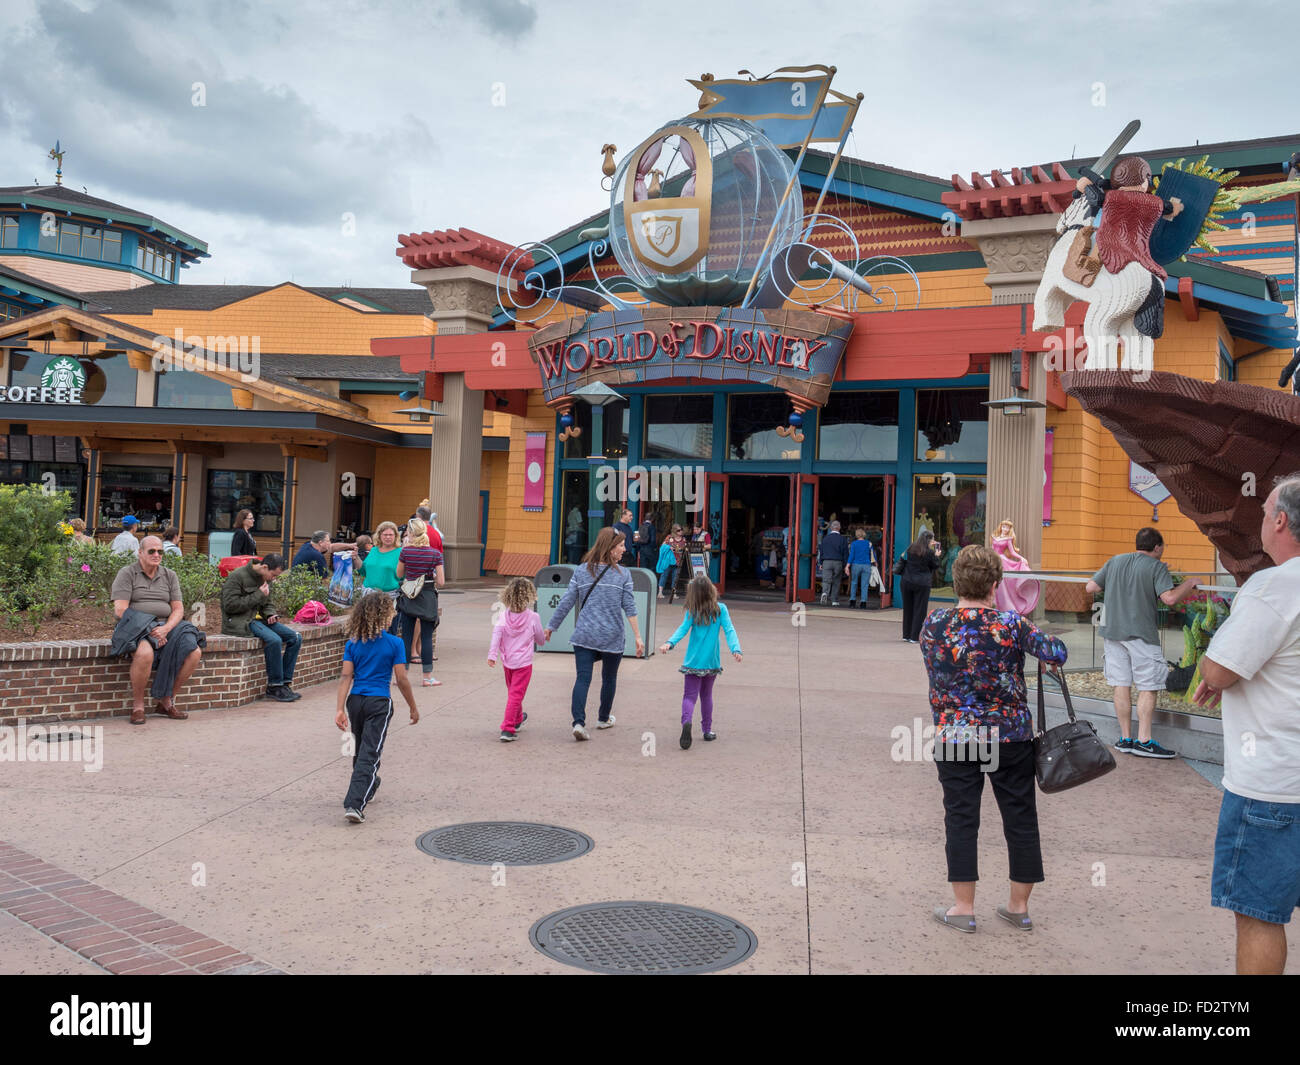 The World Of Disney Gift And Souvenir Store At Downtown Disney Shopping Mall In Orlando Florida Stock Photo